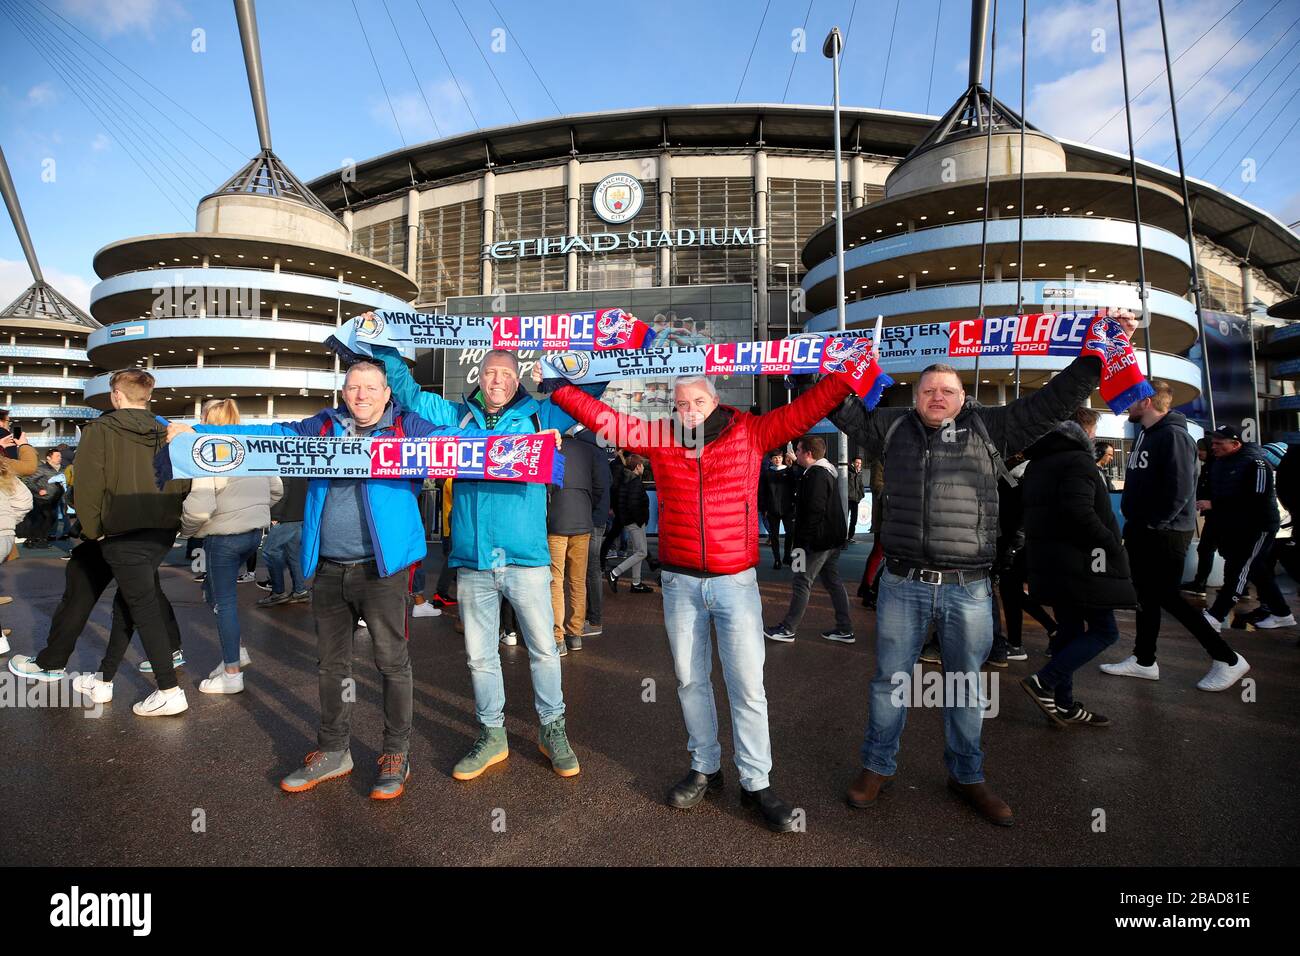 Israeli football fans with half and half scarves show their support ahead of the match Stock Photo